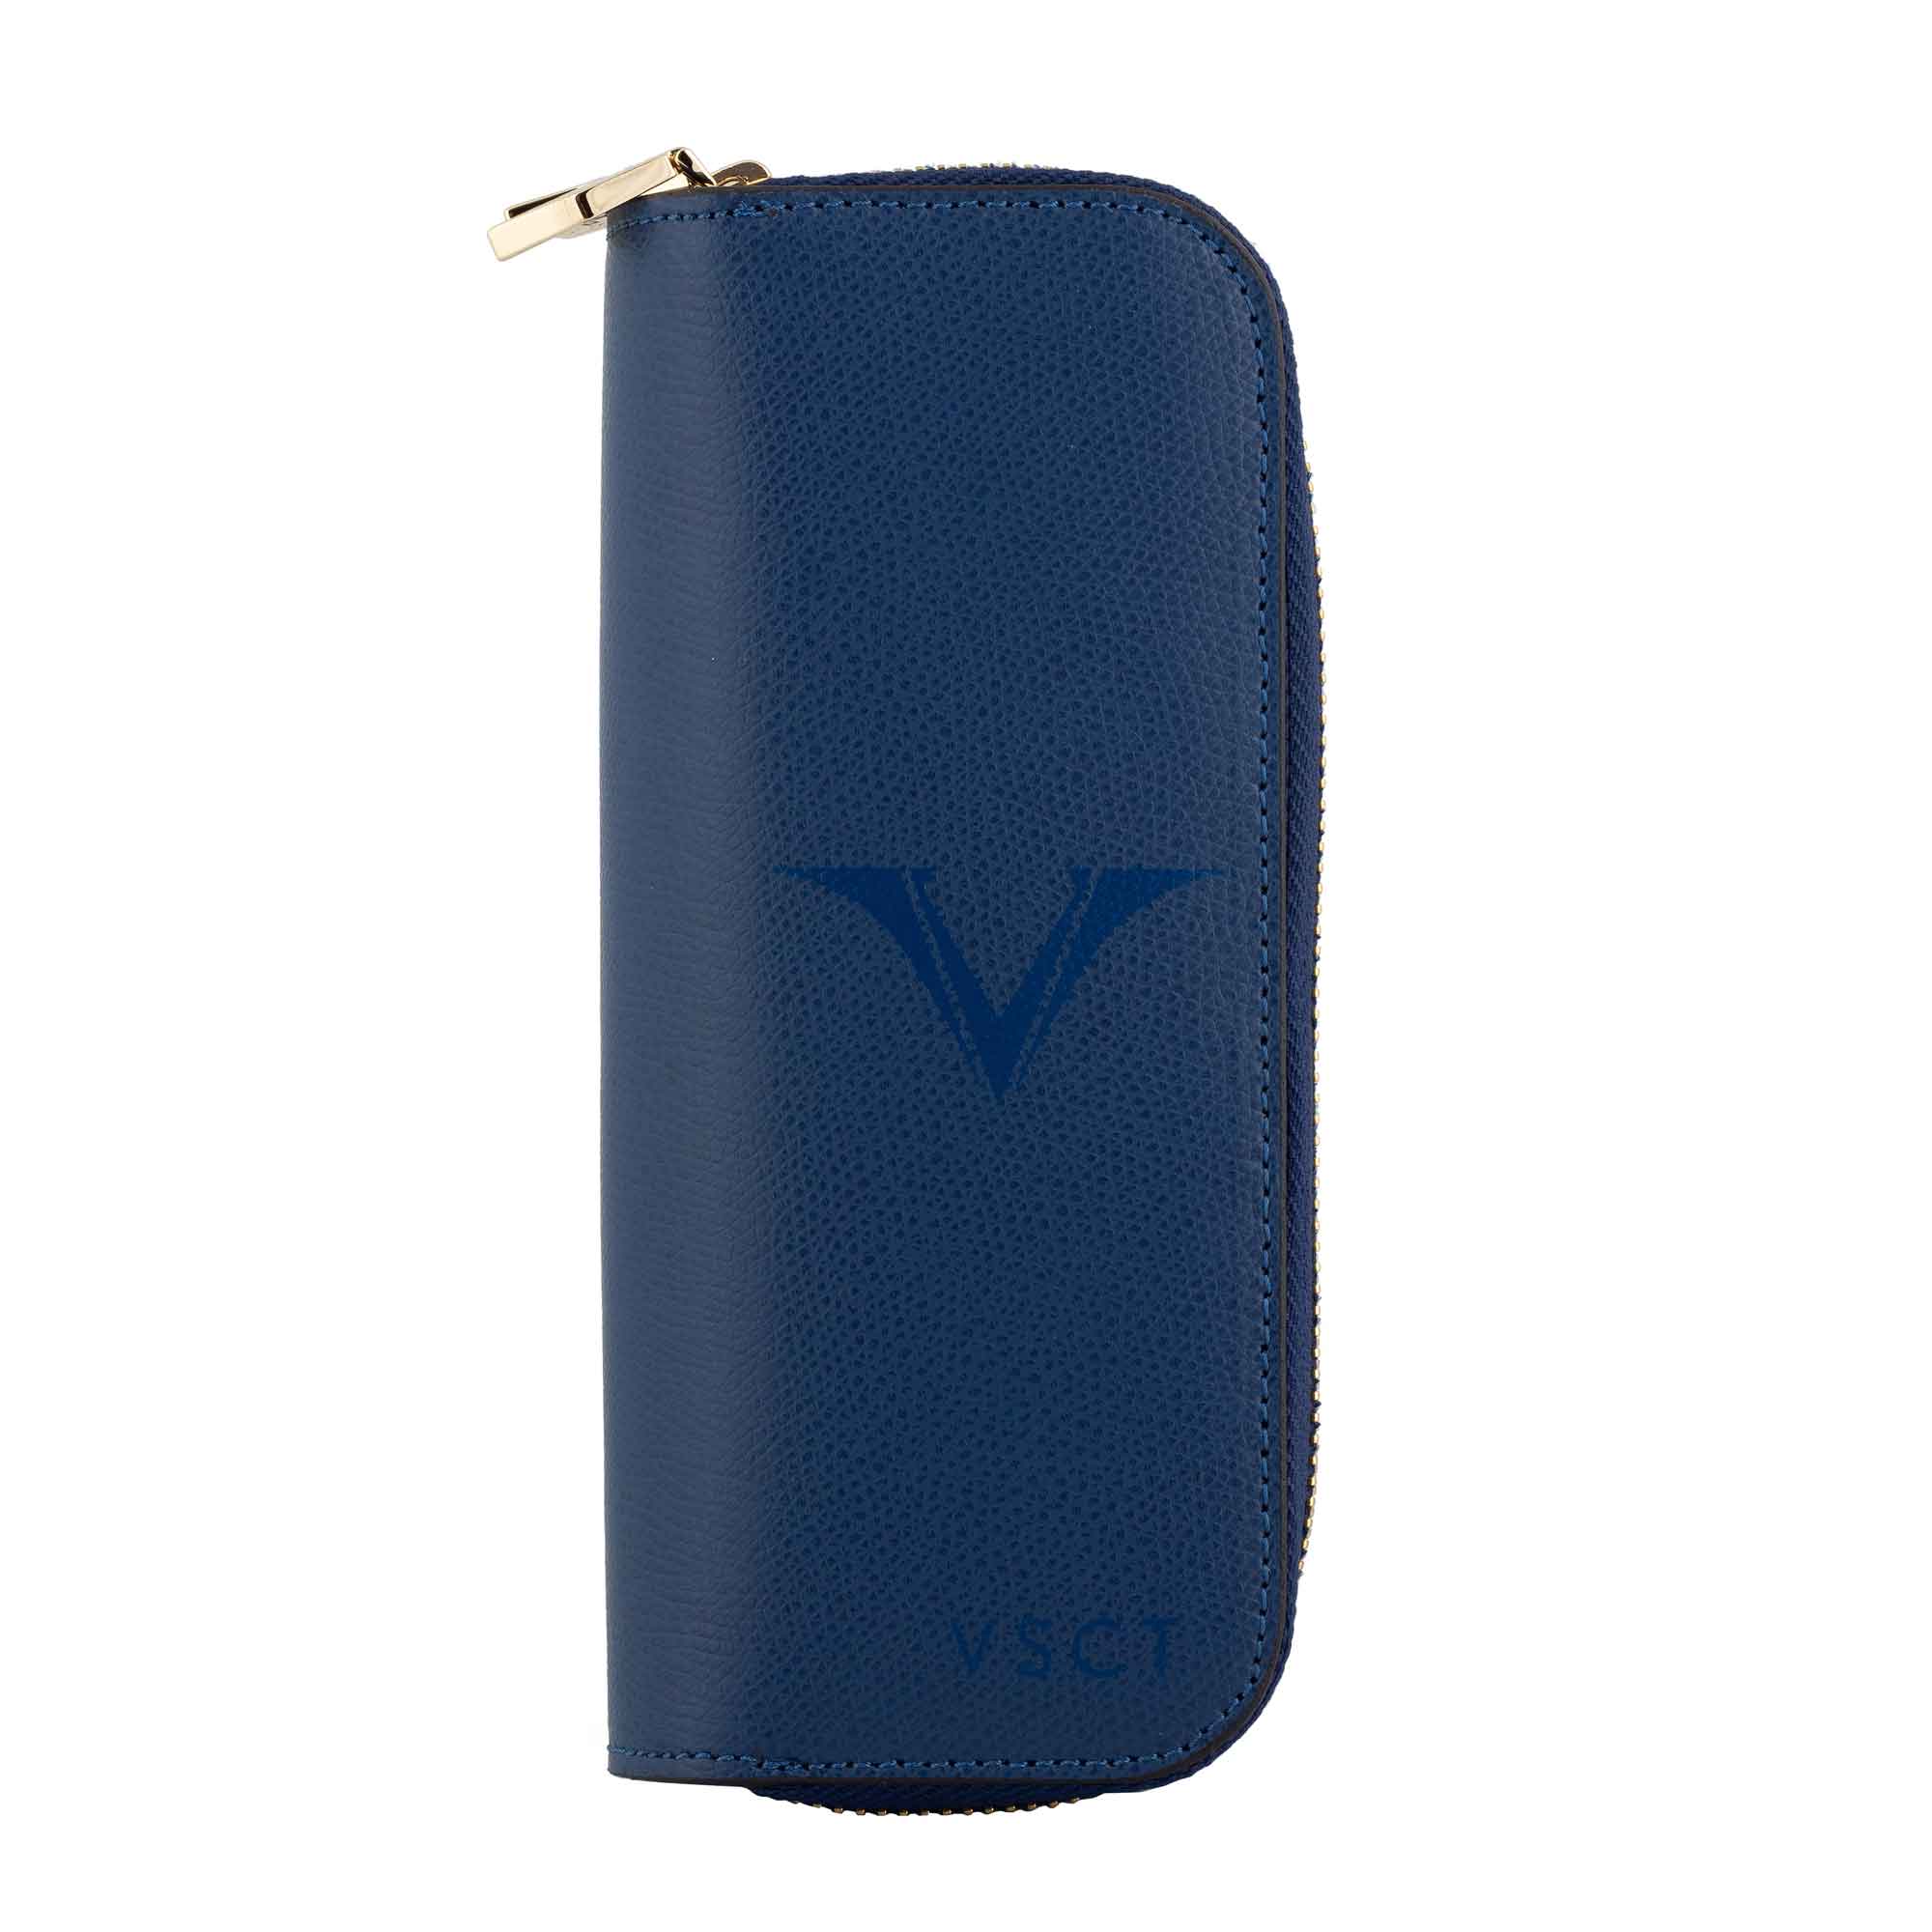 Montegrappa Business Card Case with Pockets - Blue & Grey